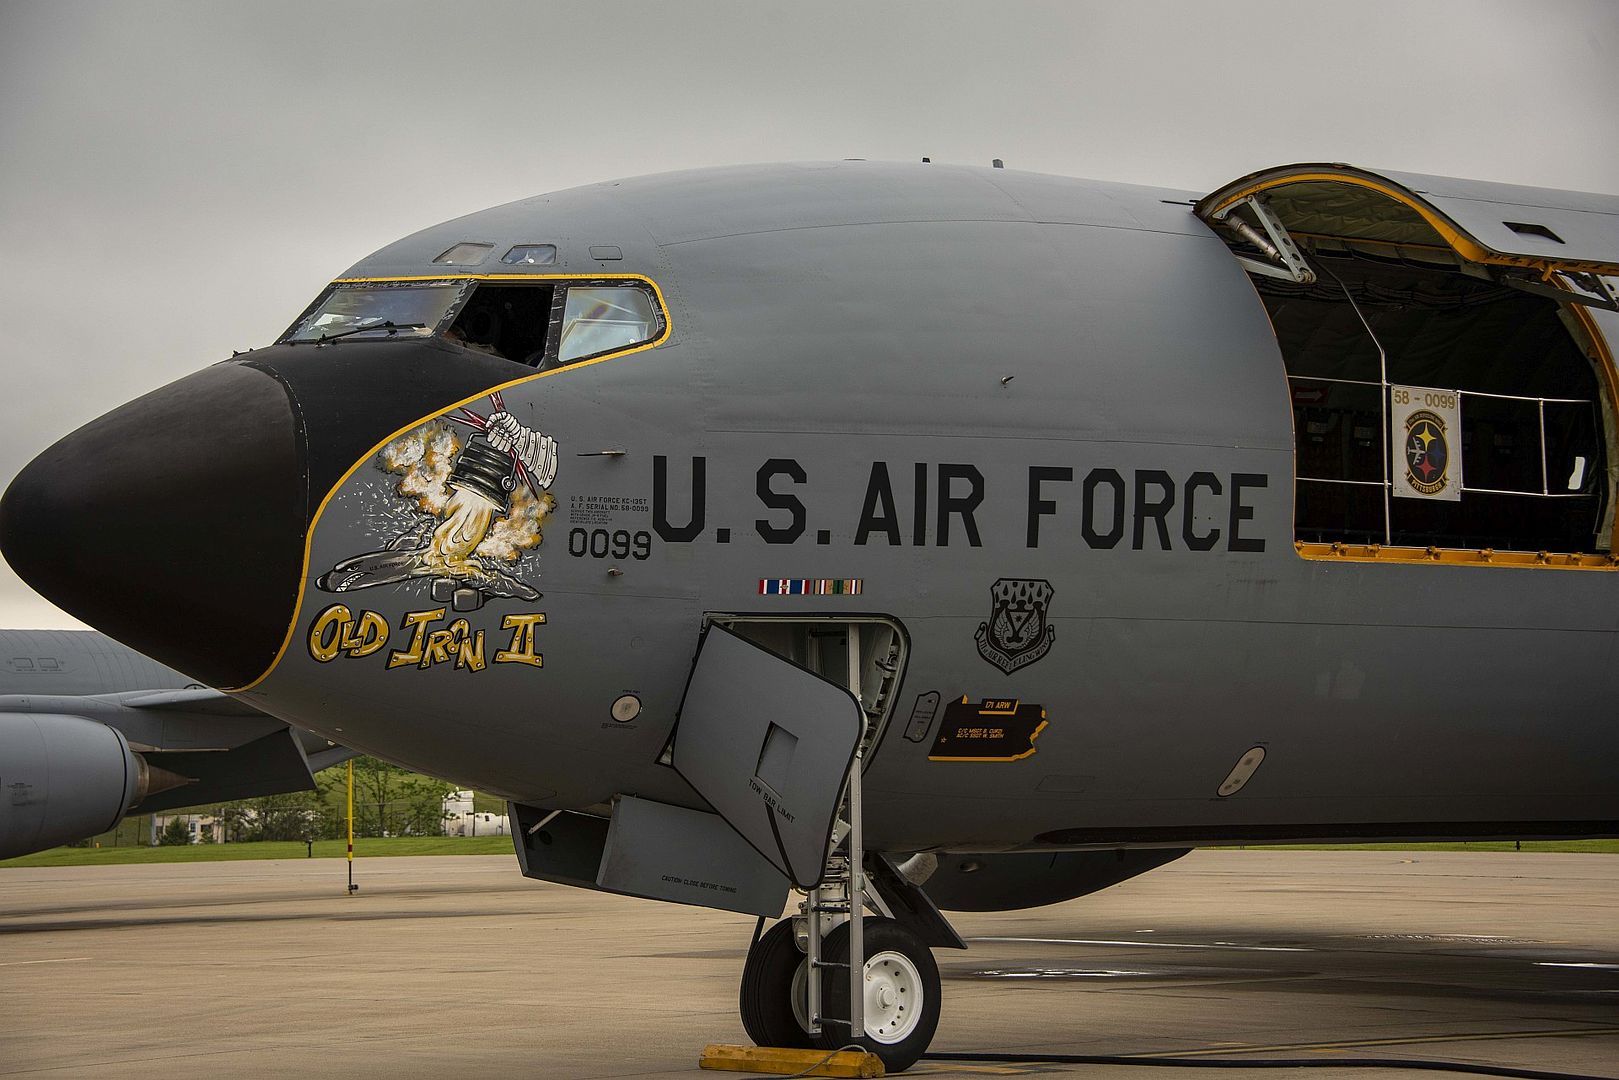 135 Stratotanker Aircraft Assigned To The Pennsylvania Air National Guard 171st Air Refueling Wing